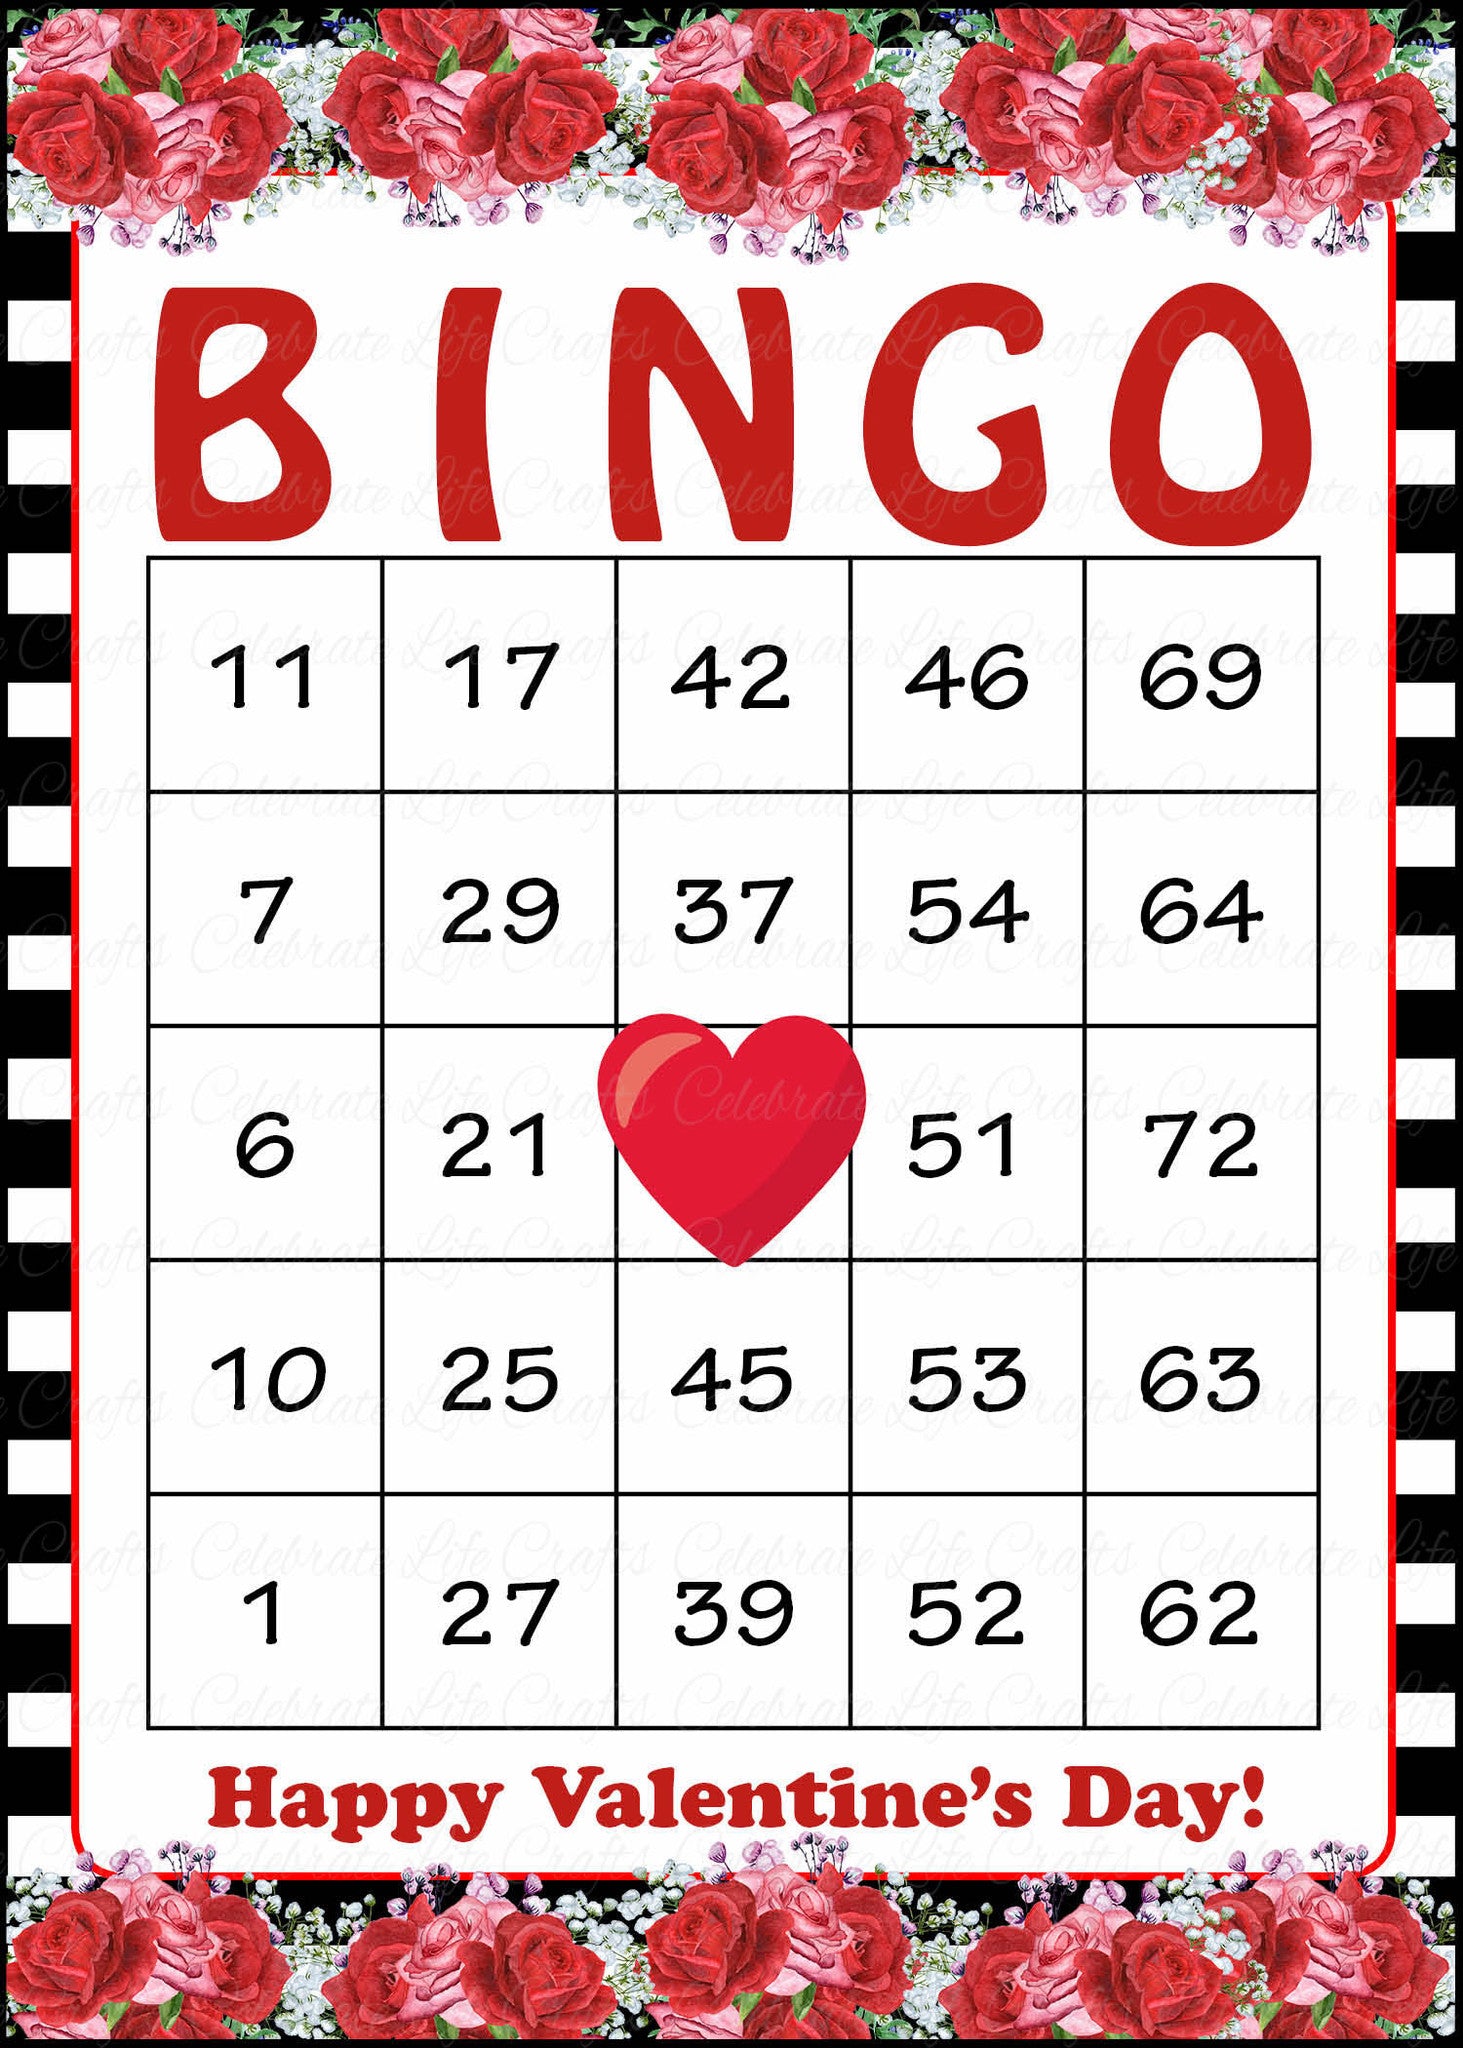 valentine-bingo-game-download-for-holiday-party-ideas-valentine-s-day